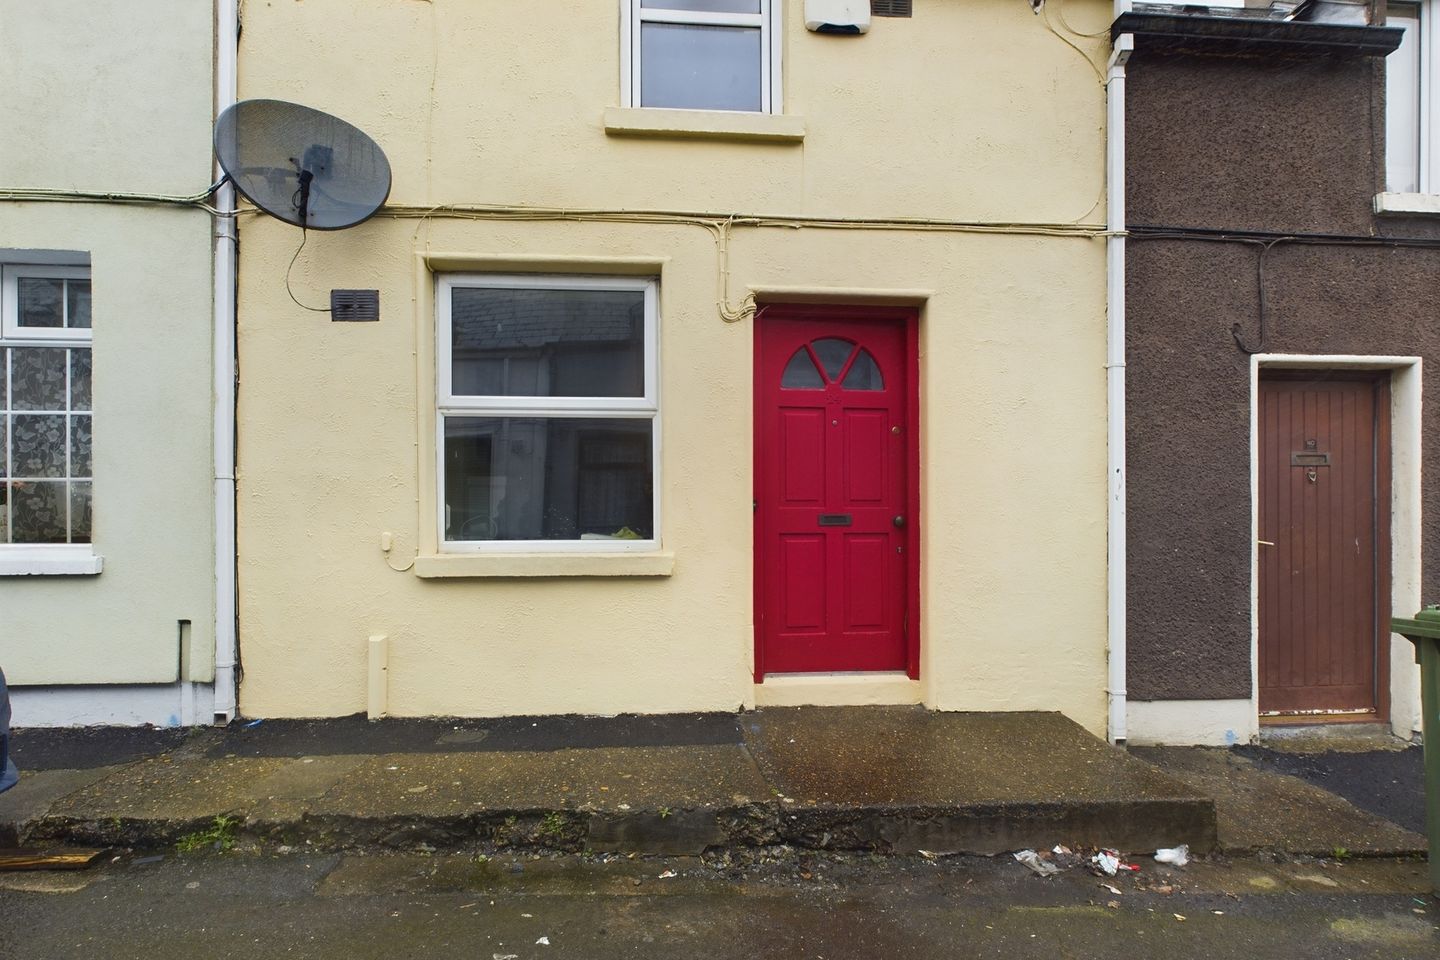 24 Emmet Place, Waterford City, Co. Waterford, X91XNX5